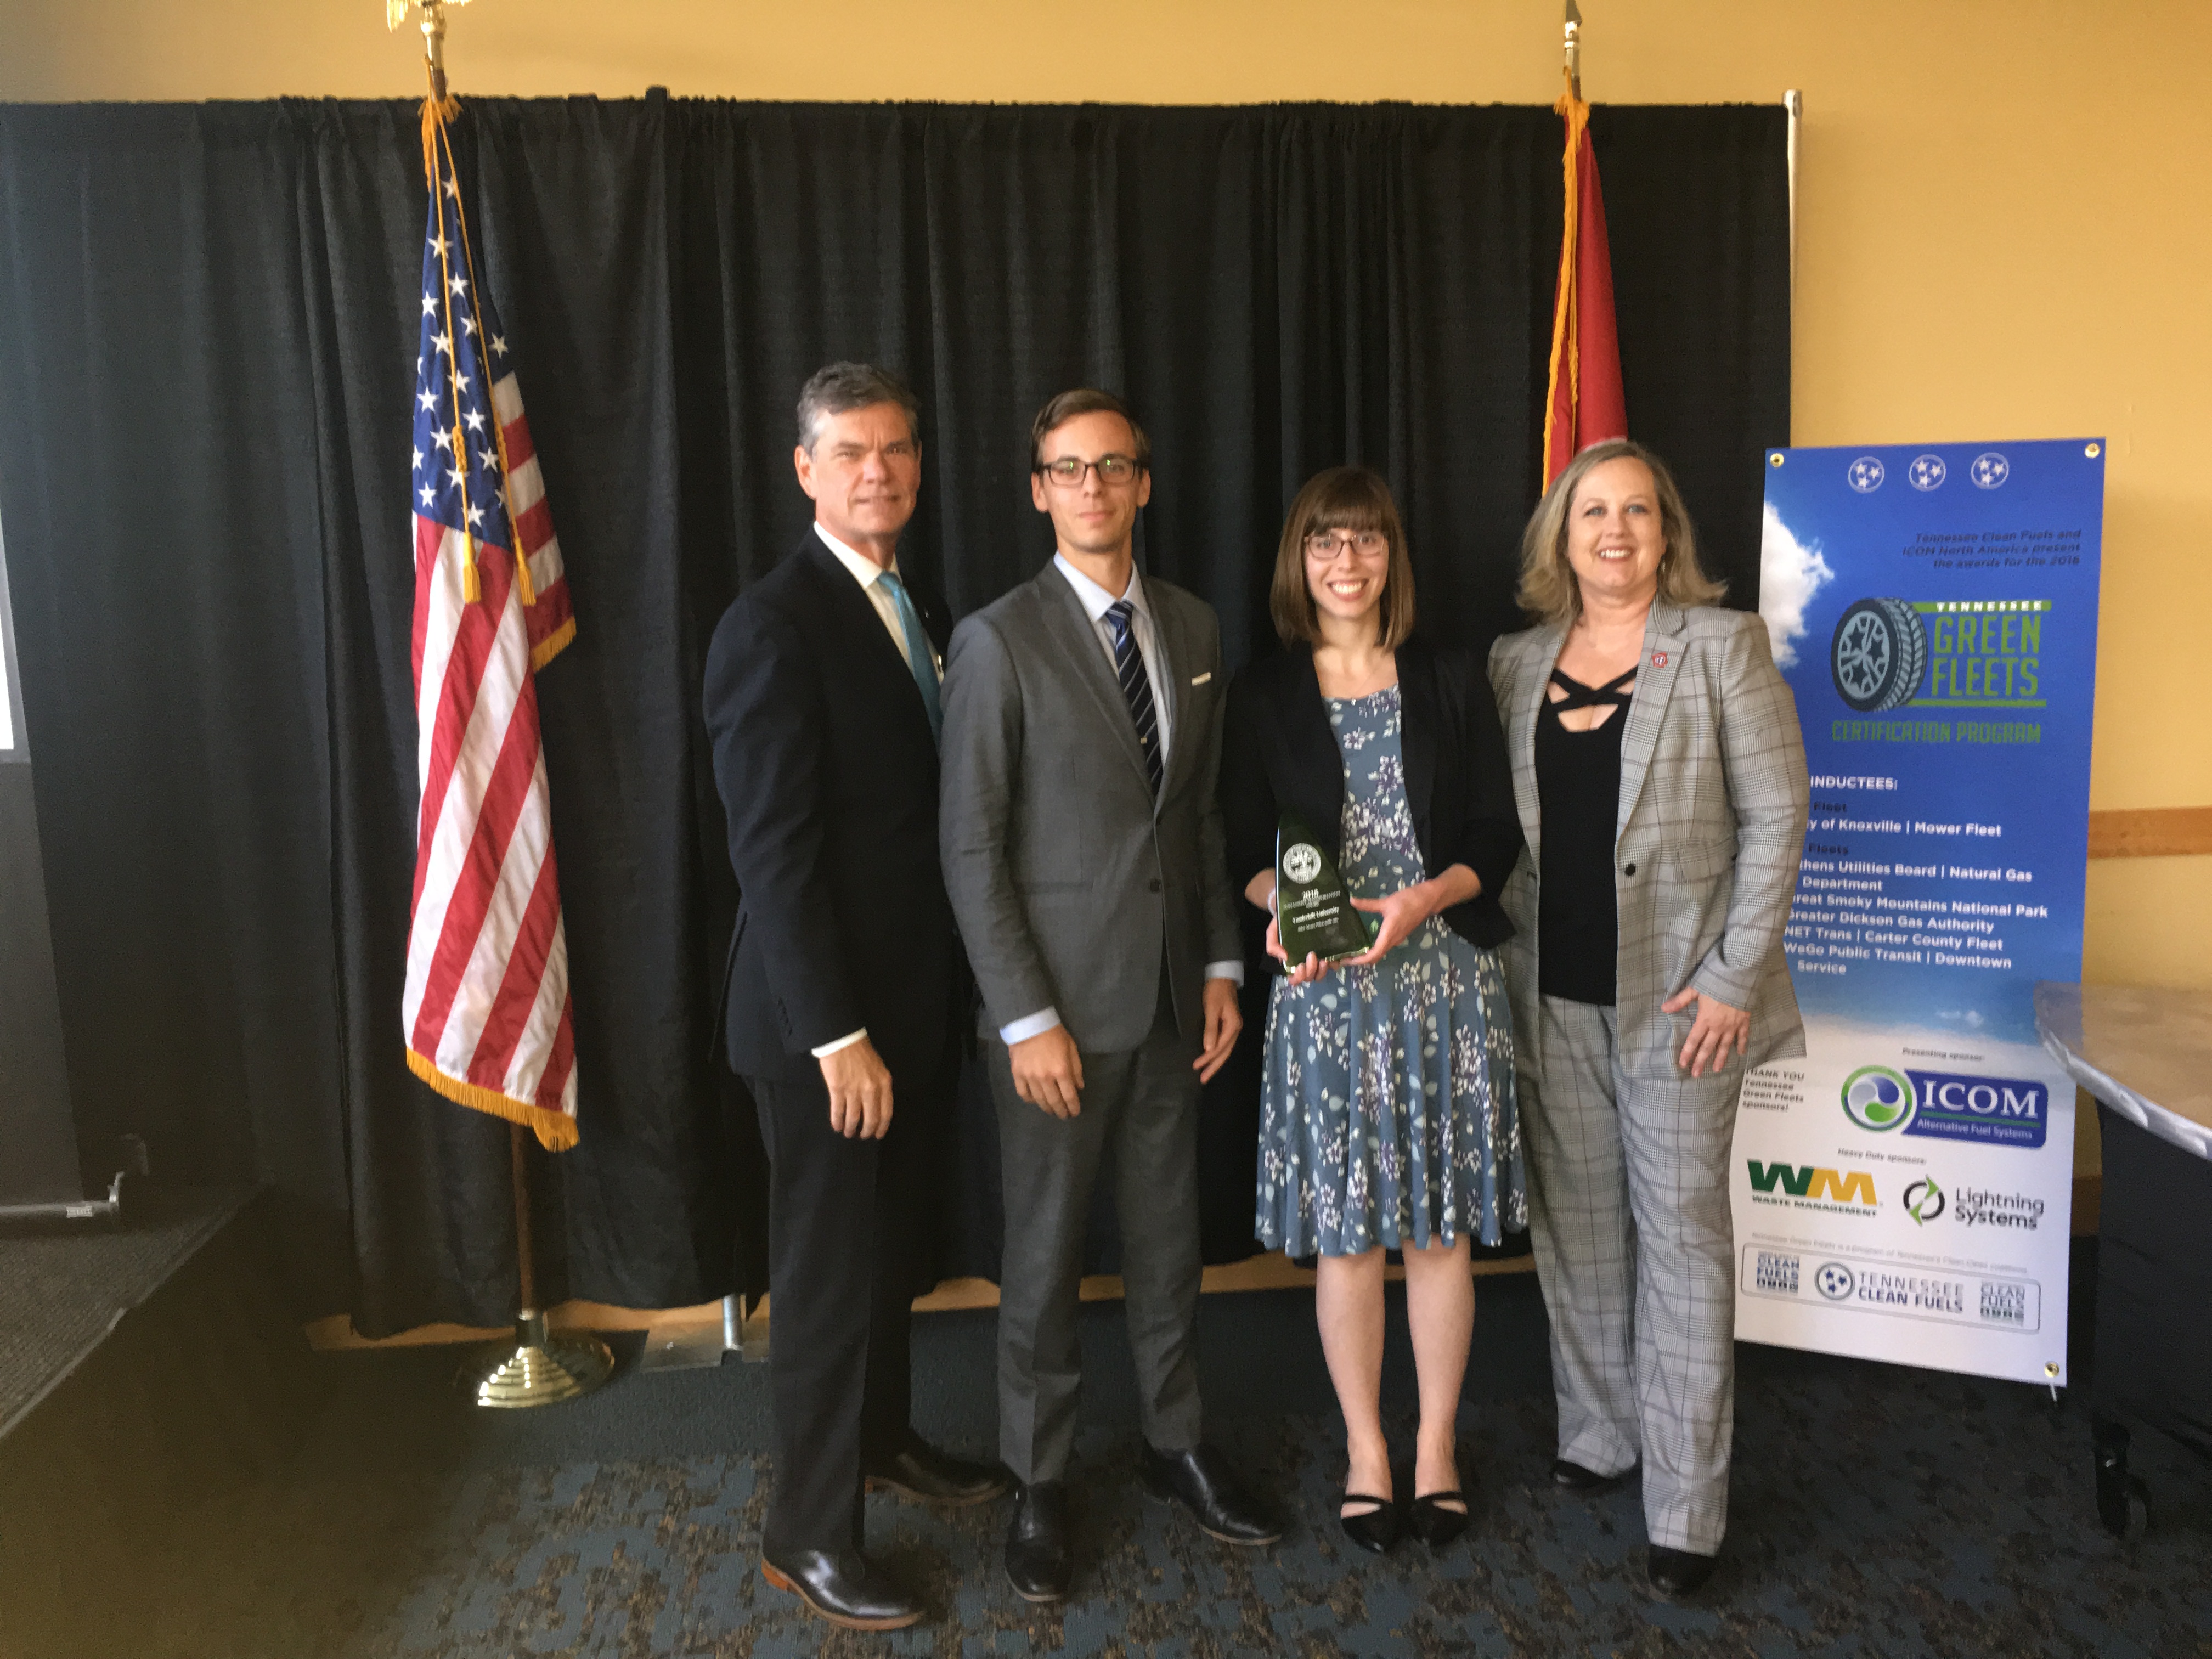 L-r: Daniel E. Pallme, assistant chief of environment and planning for TN Department of Transportation; Will Barbour, Vanderbilt University; Ashley Majewski, Vanderbilt University; Shari Meghreblian, commissioner, TN Department of Environment and Conservation